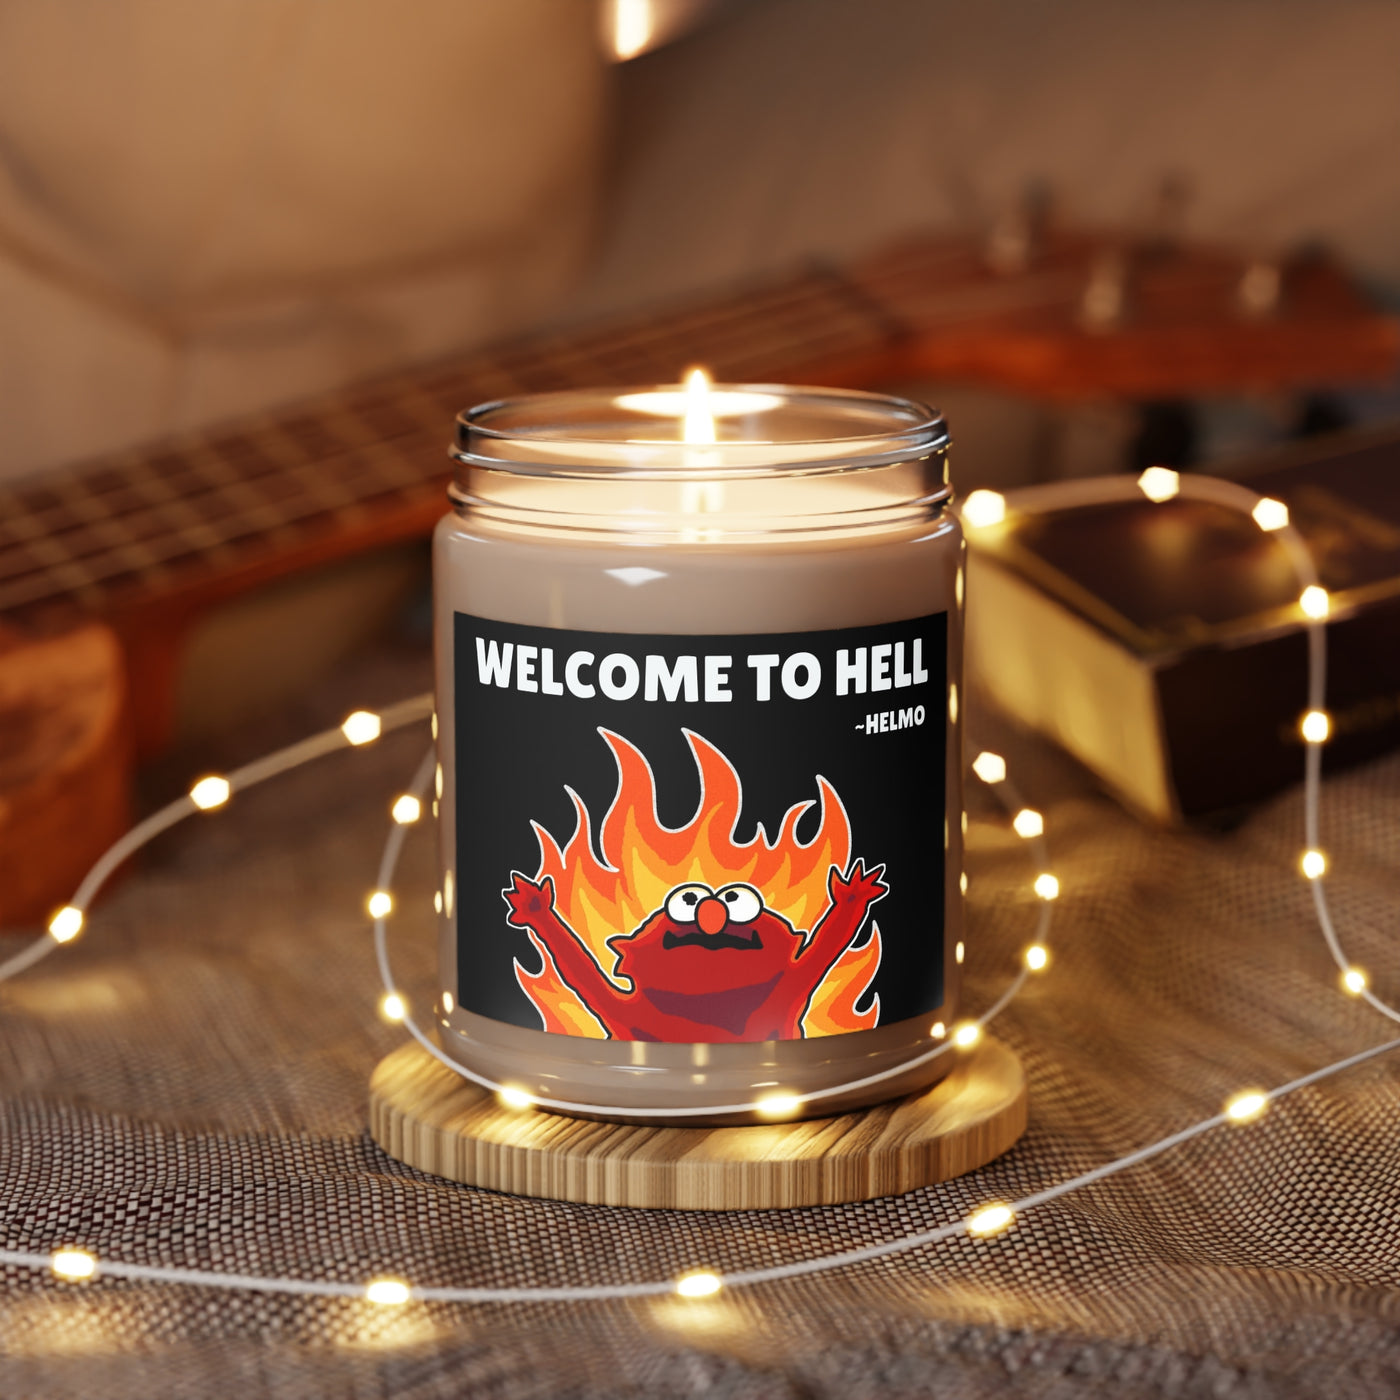 Welcome to Hell -Helmo